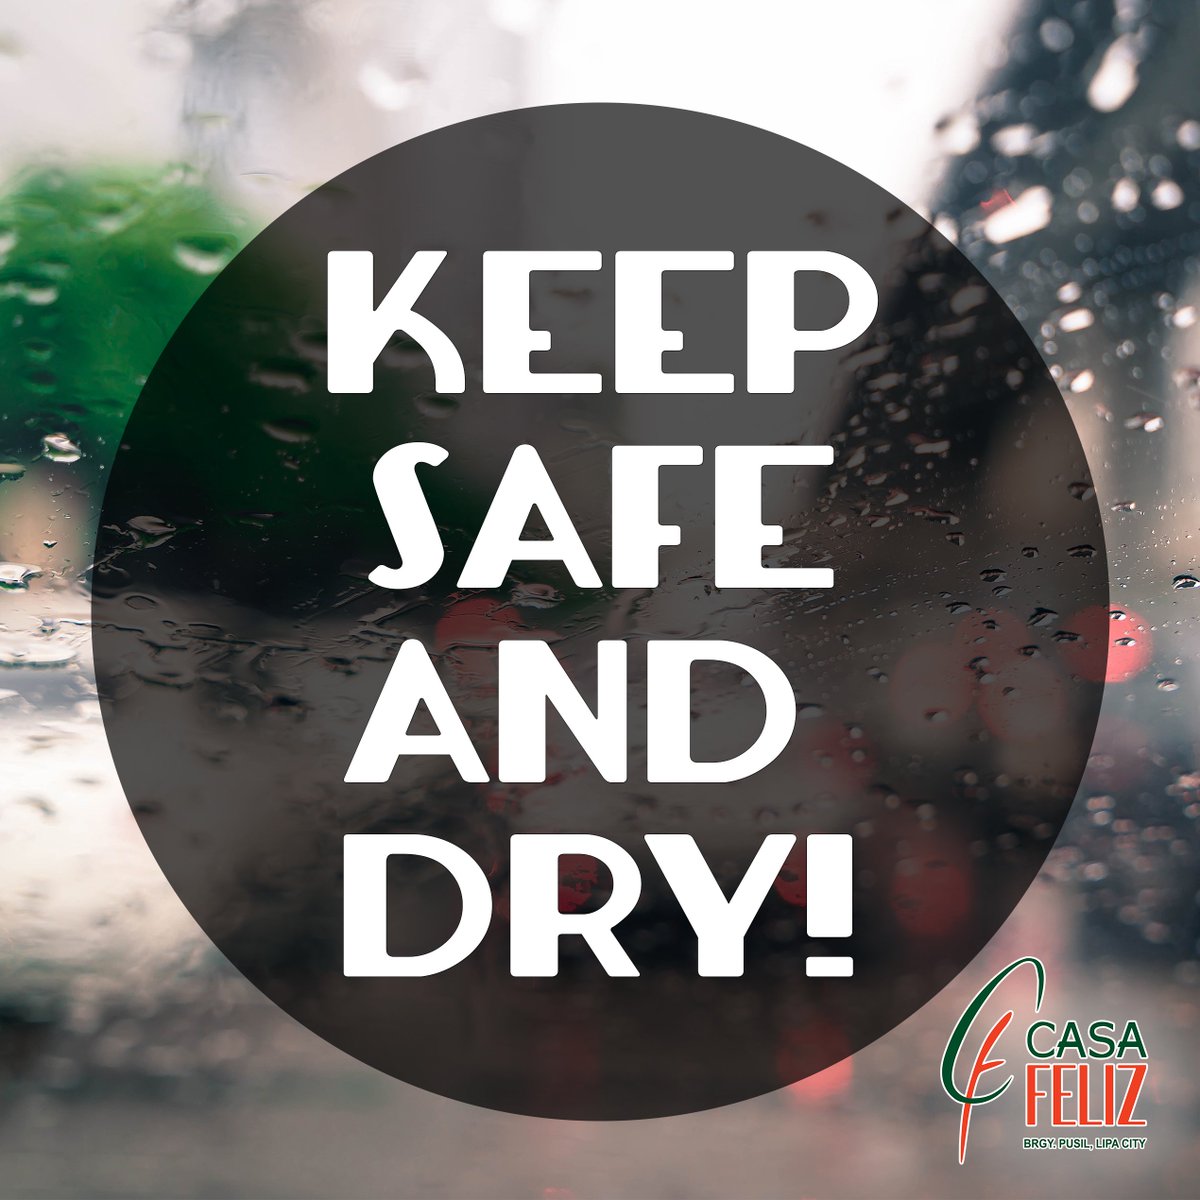 Casa Feliz on X: Keep safe and dry. BE ALERT. BE STAY INFORMED